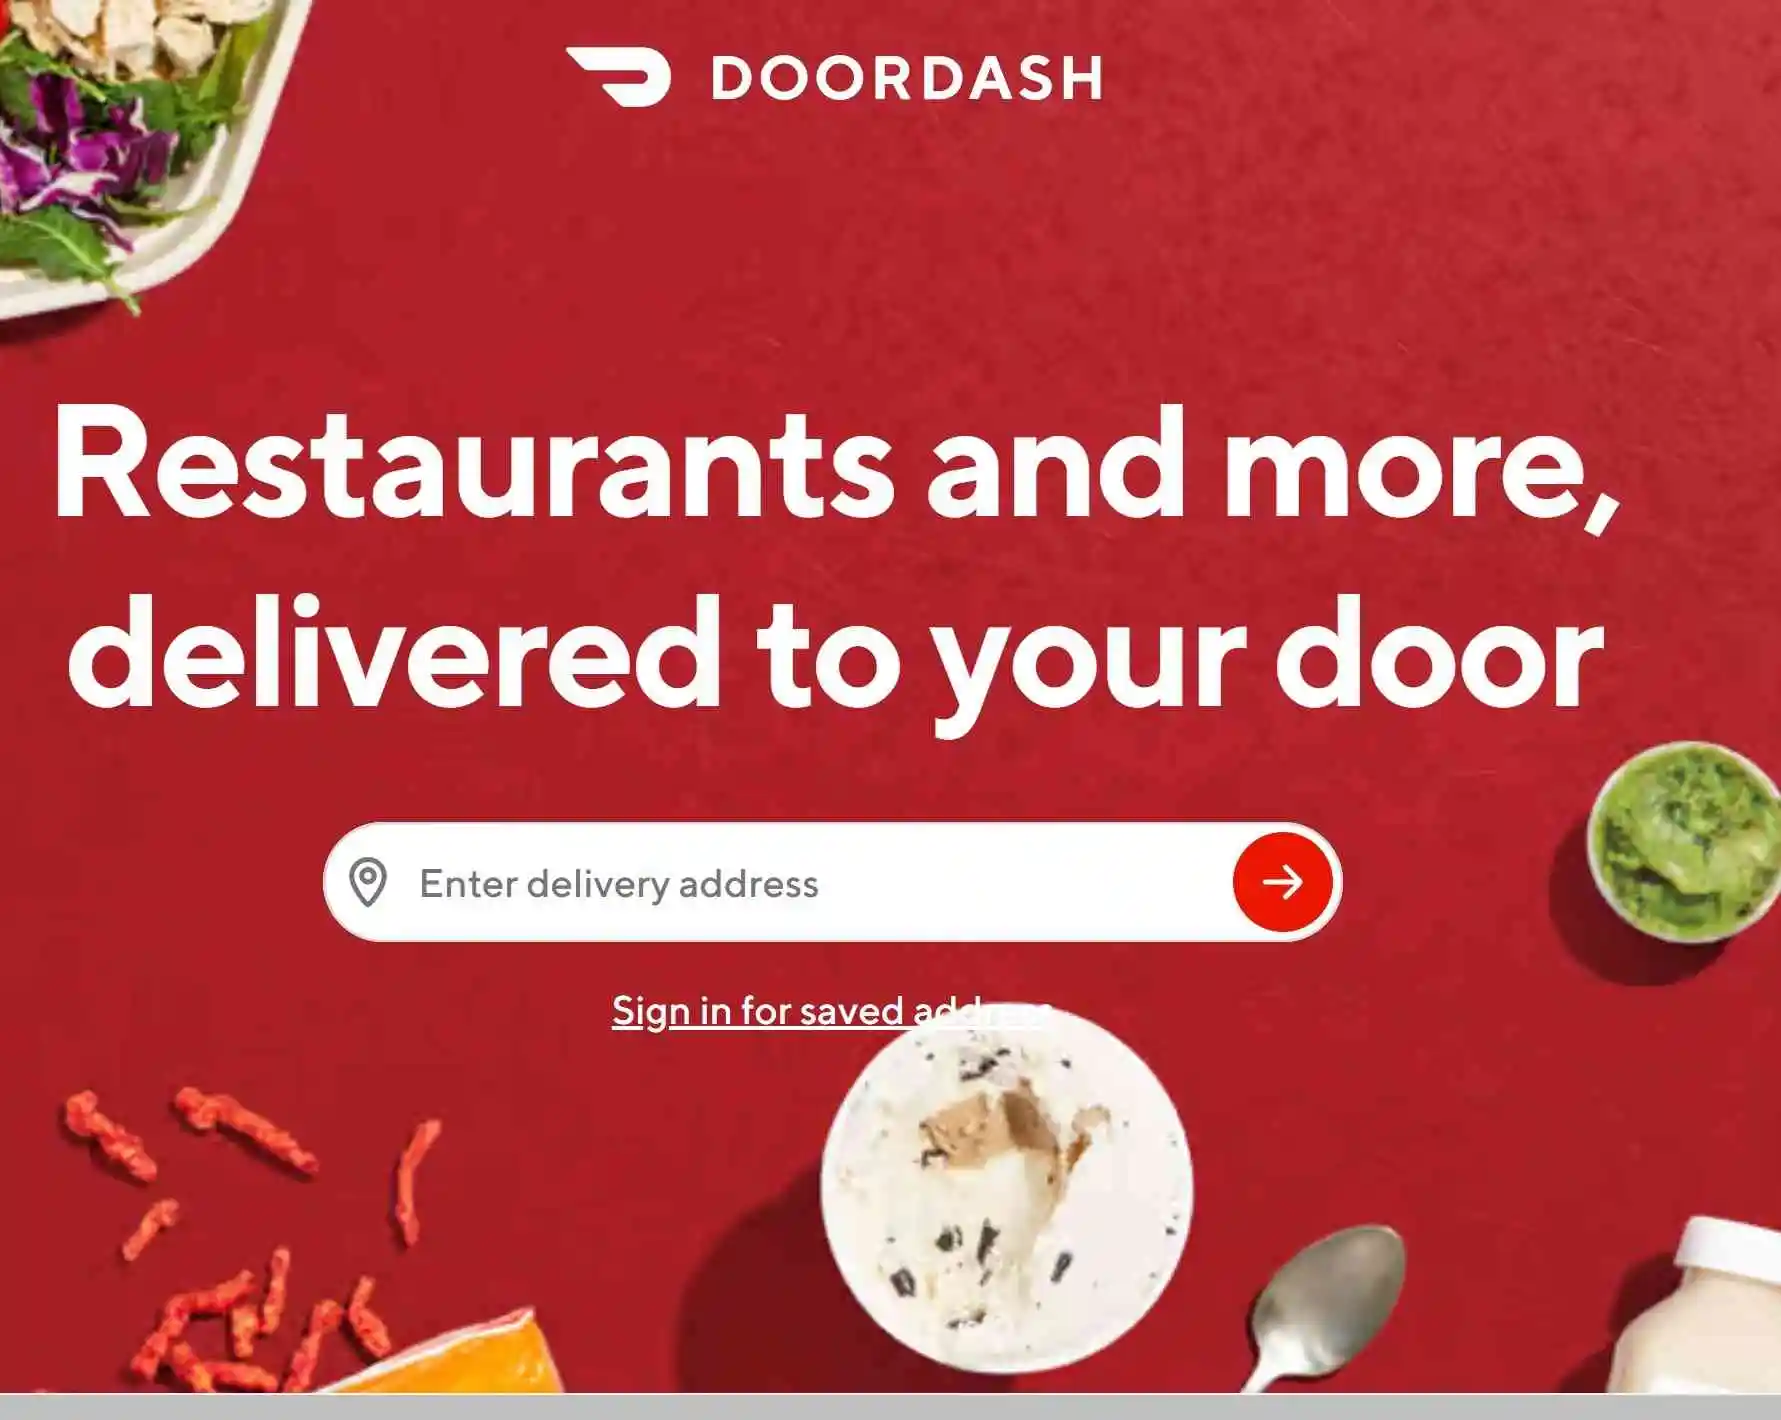 How to Delete DoorDash Account and Cancel Subscription In 2022